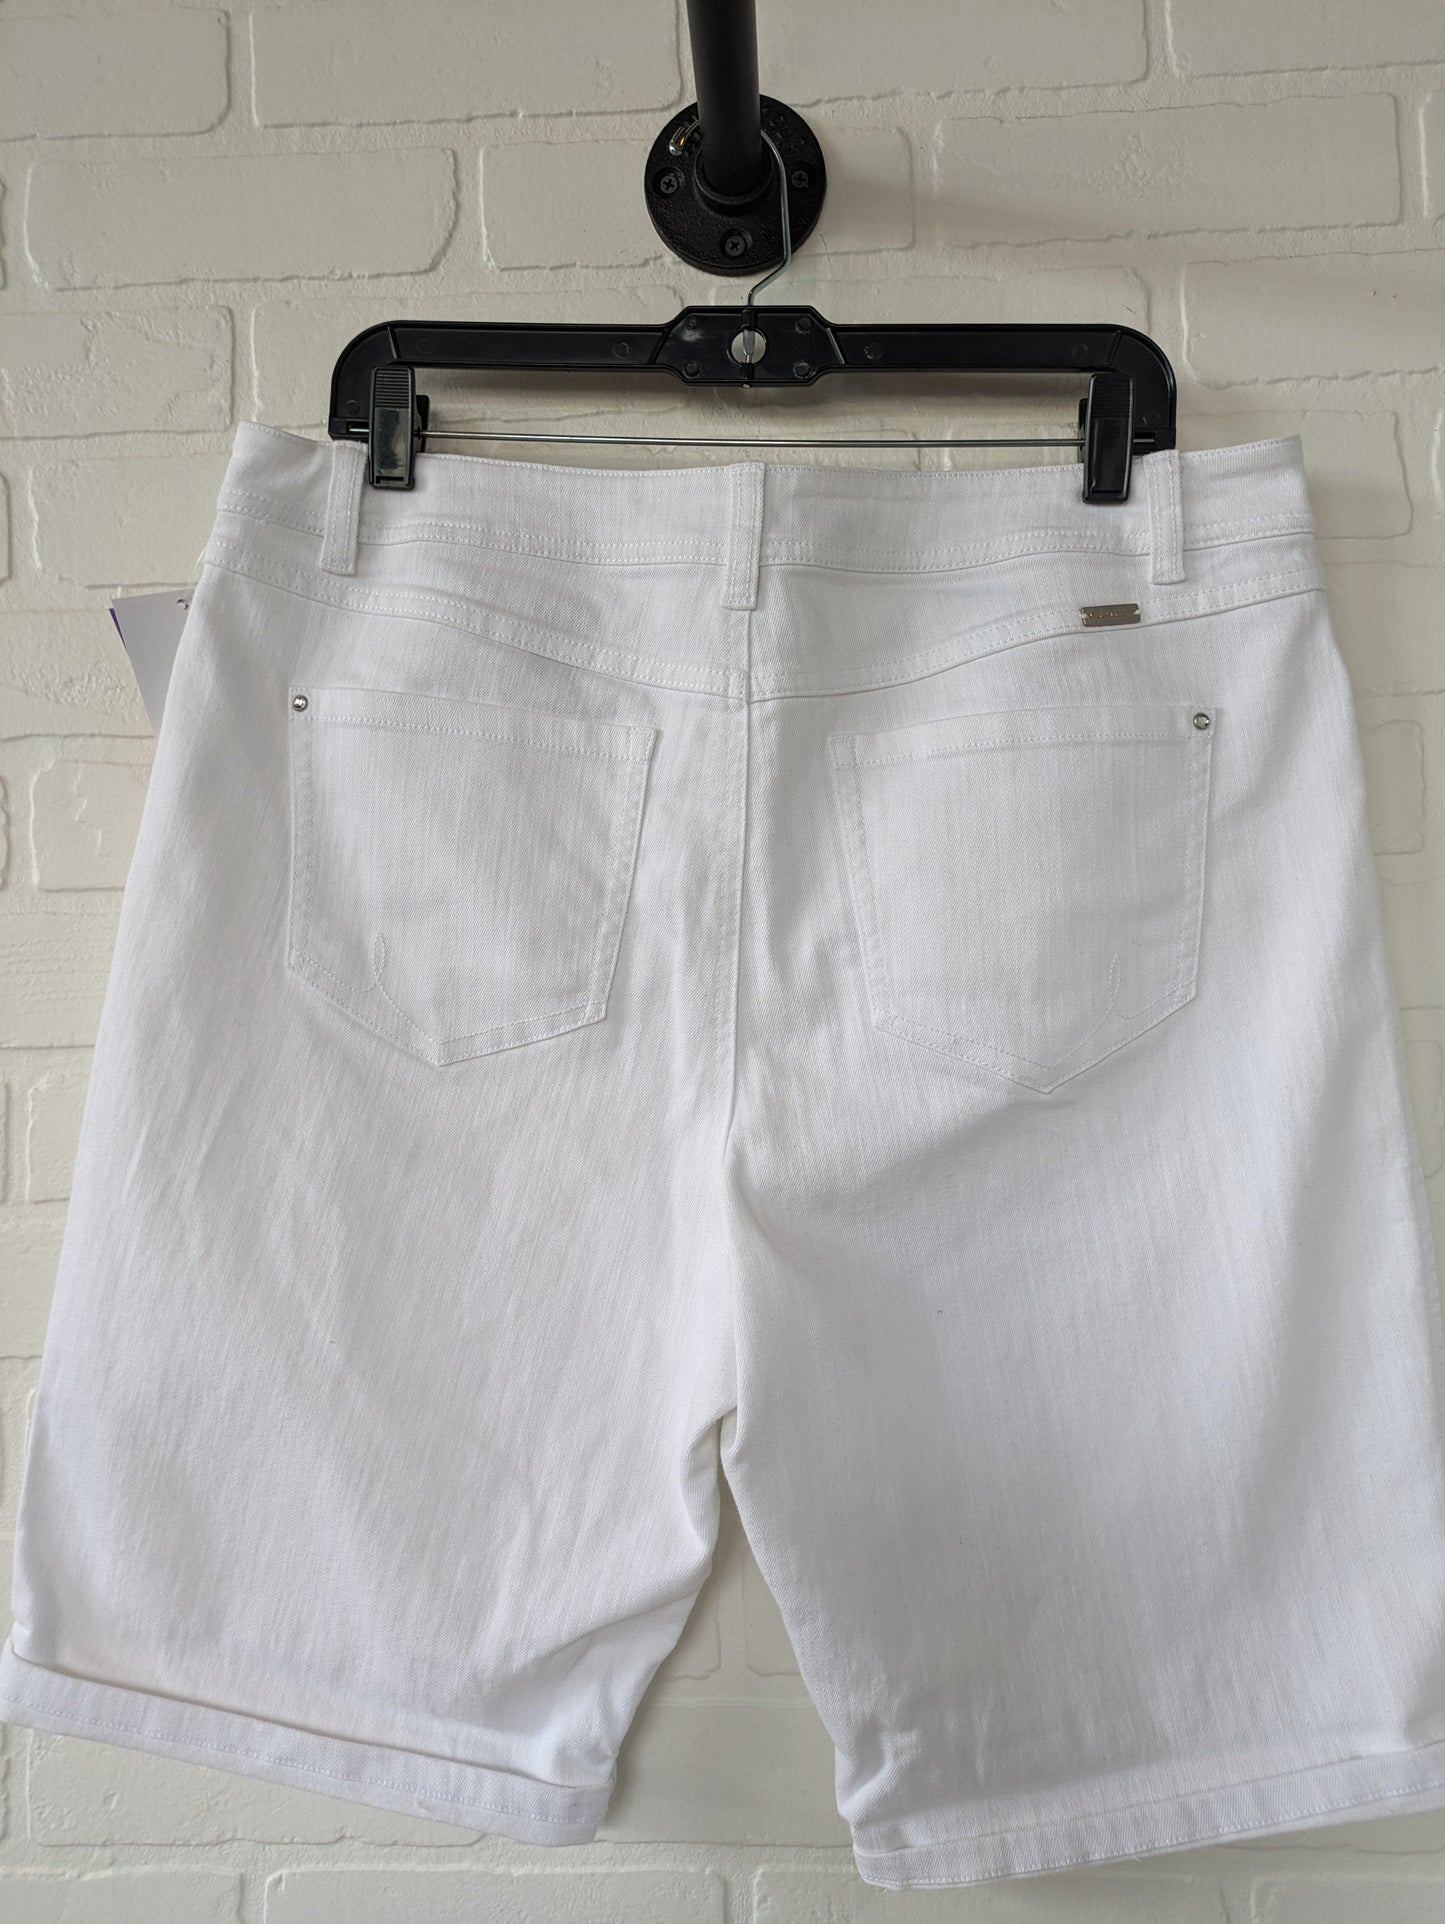 Shorts By Inc  Size: 14